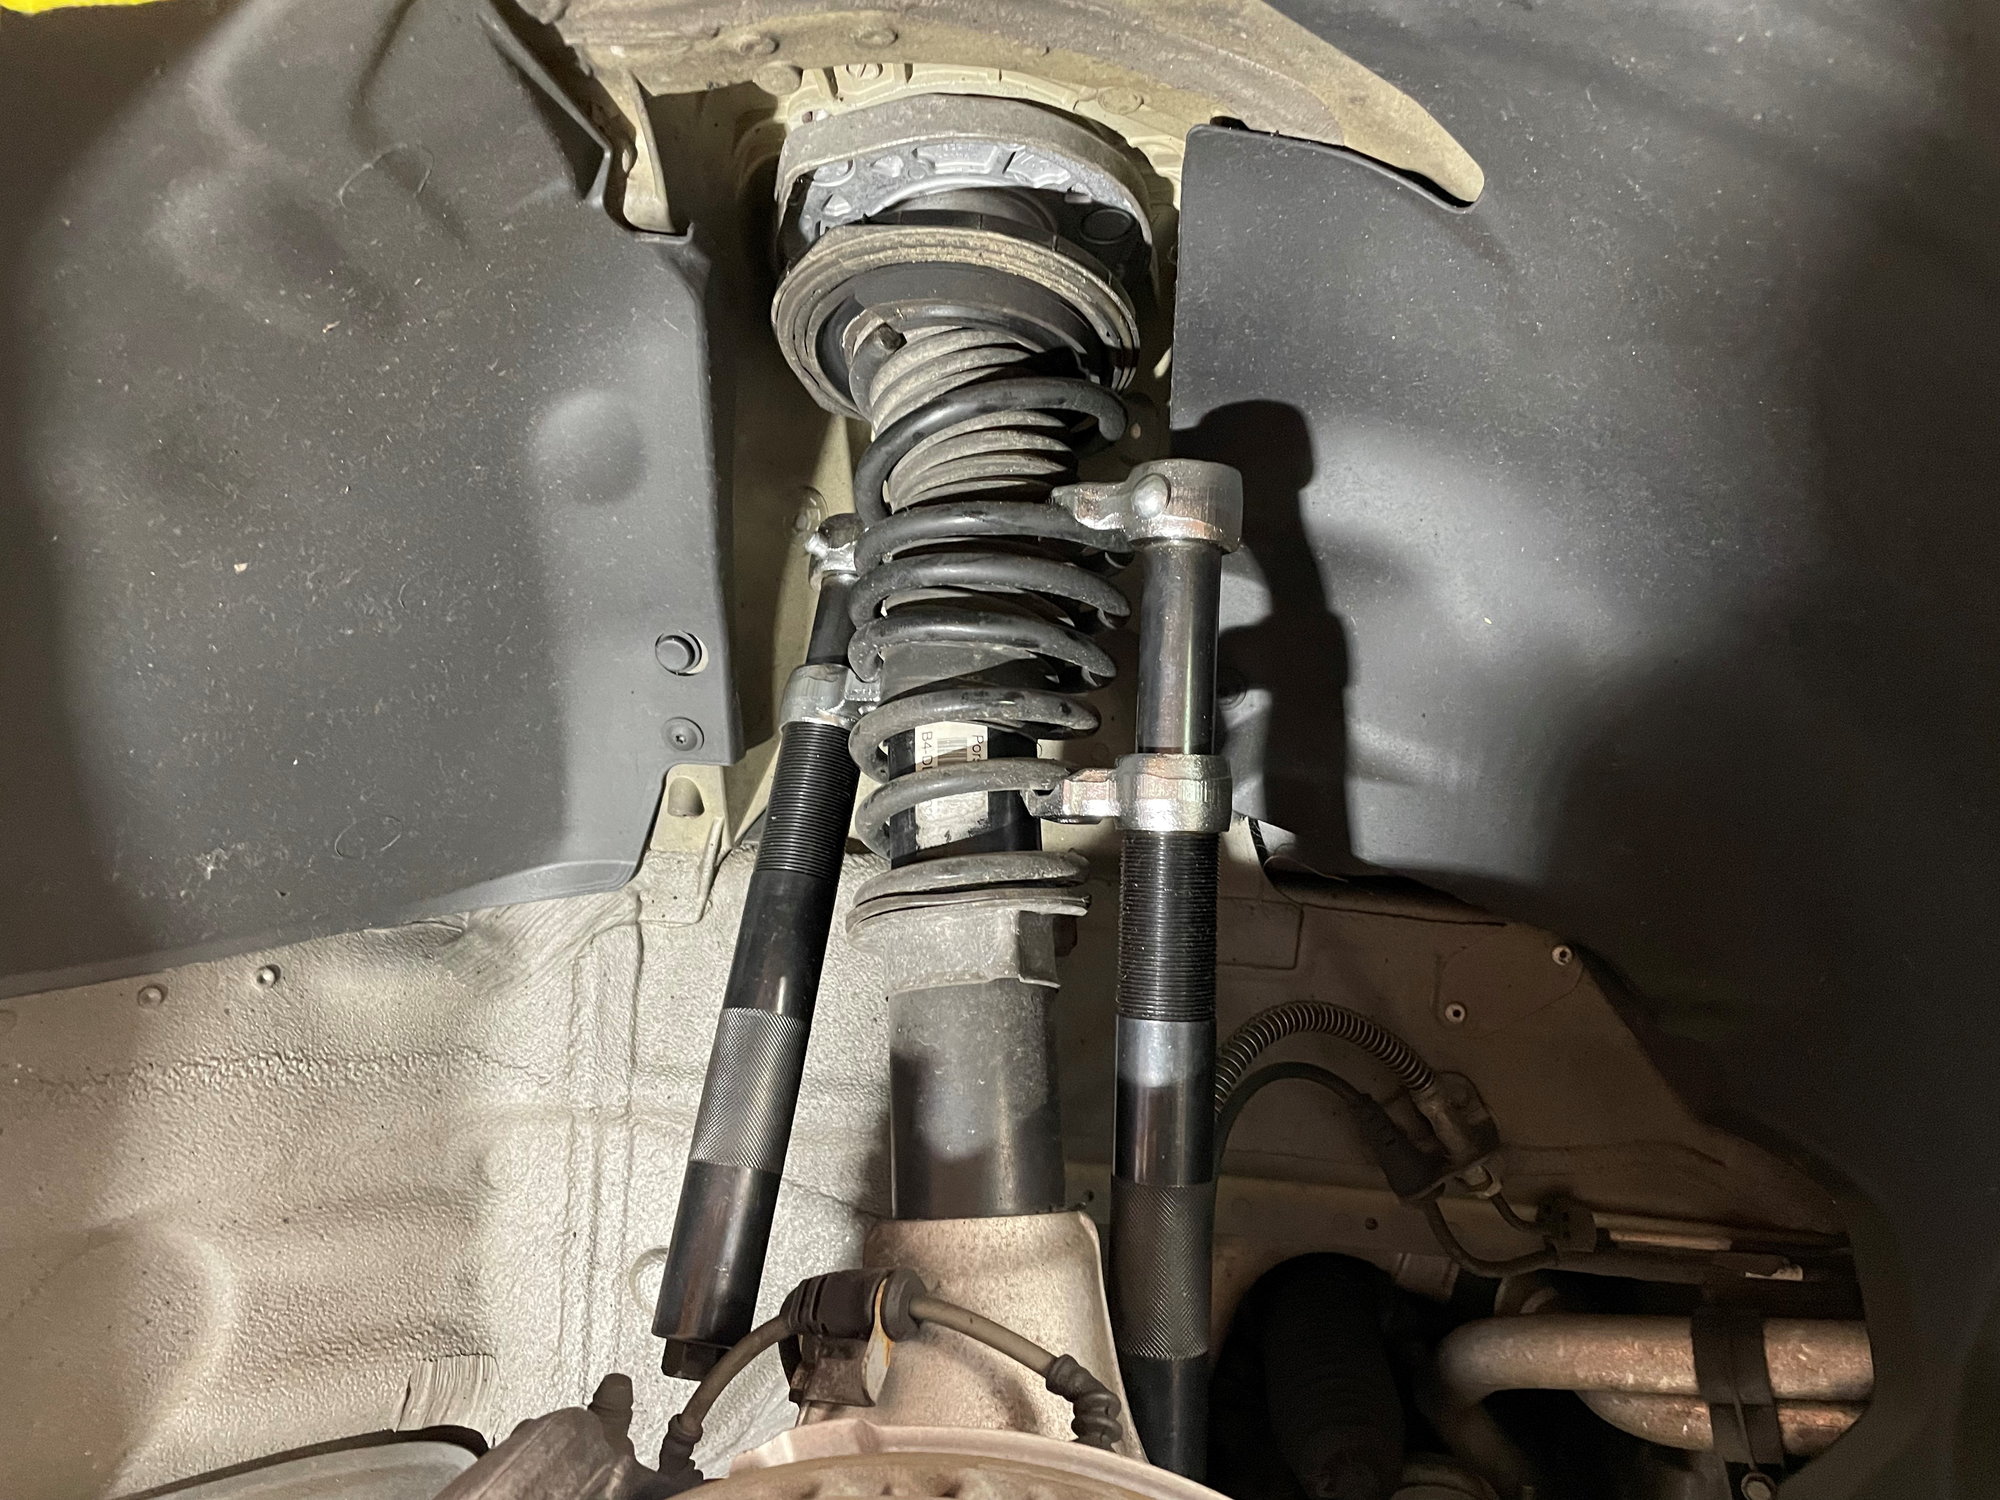 981 lowering spring install. The easy way - Rennlist - Porsche Discussion  Forums